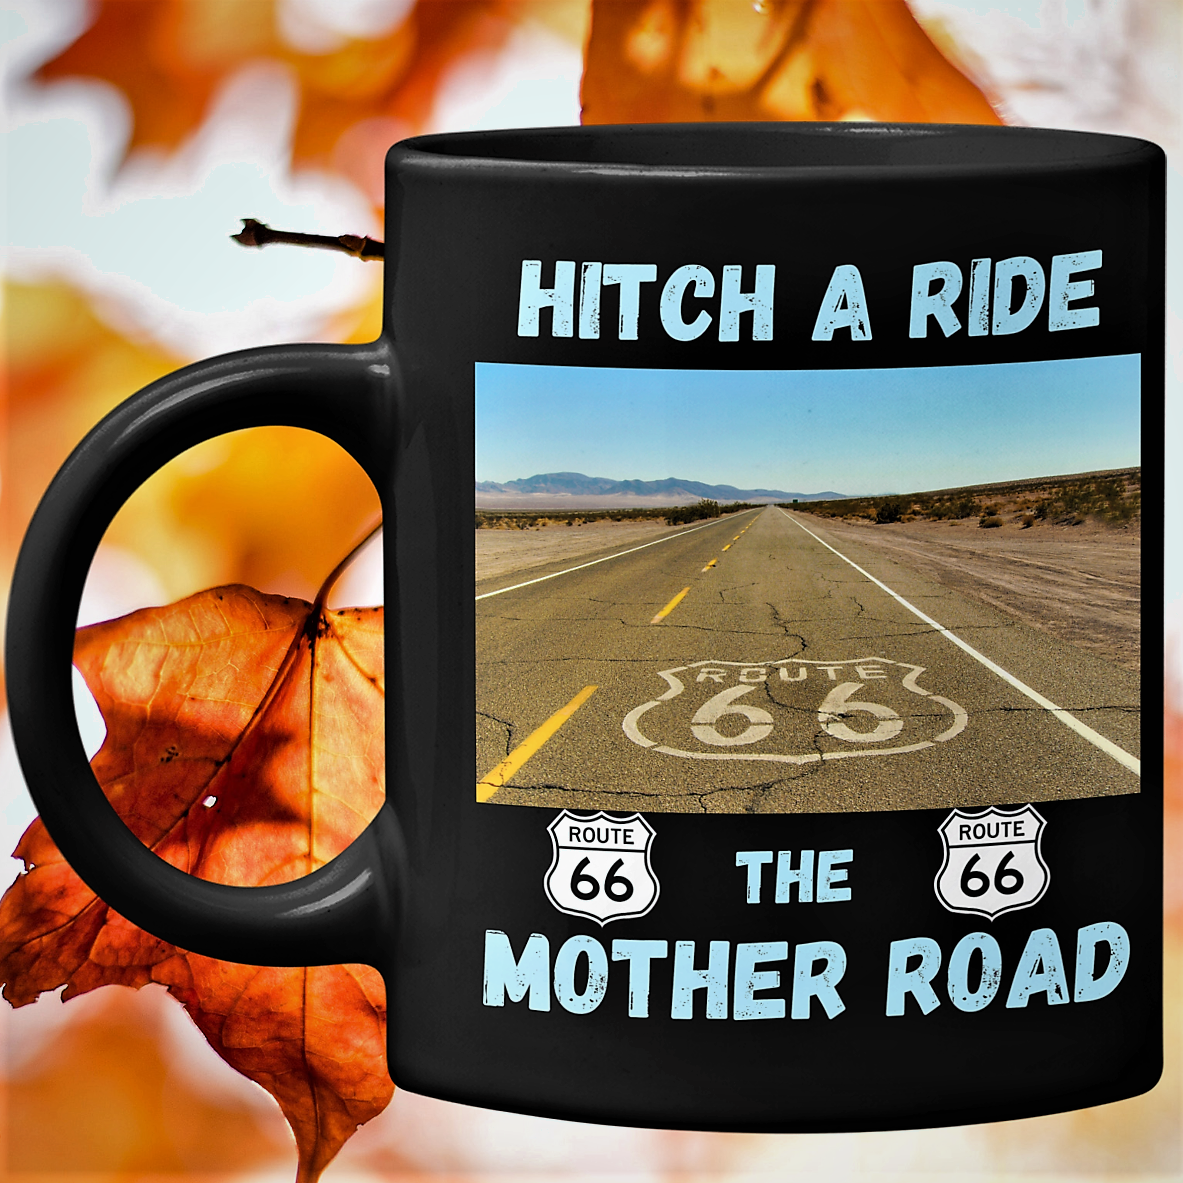 Hitch a ride, the mother road, us route 66 coffee mug, get your kicks on route 66, Route 66 souvenir mug, i love route 66